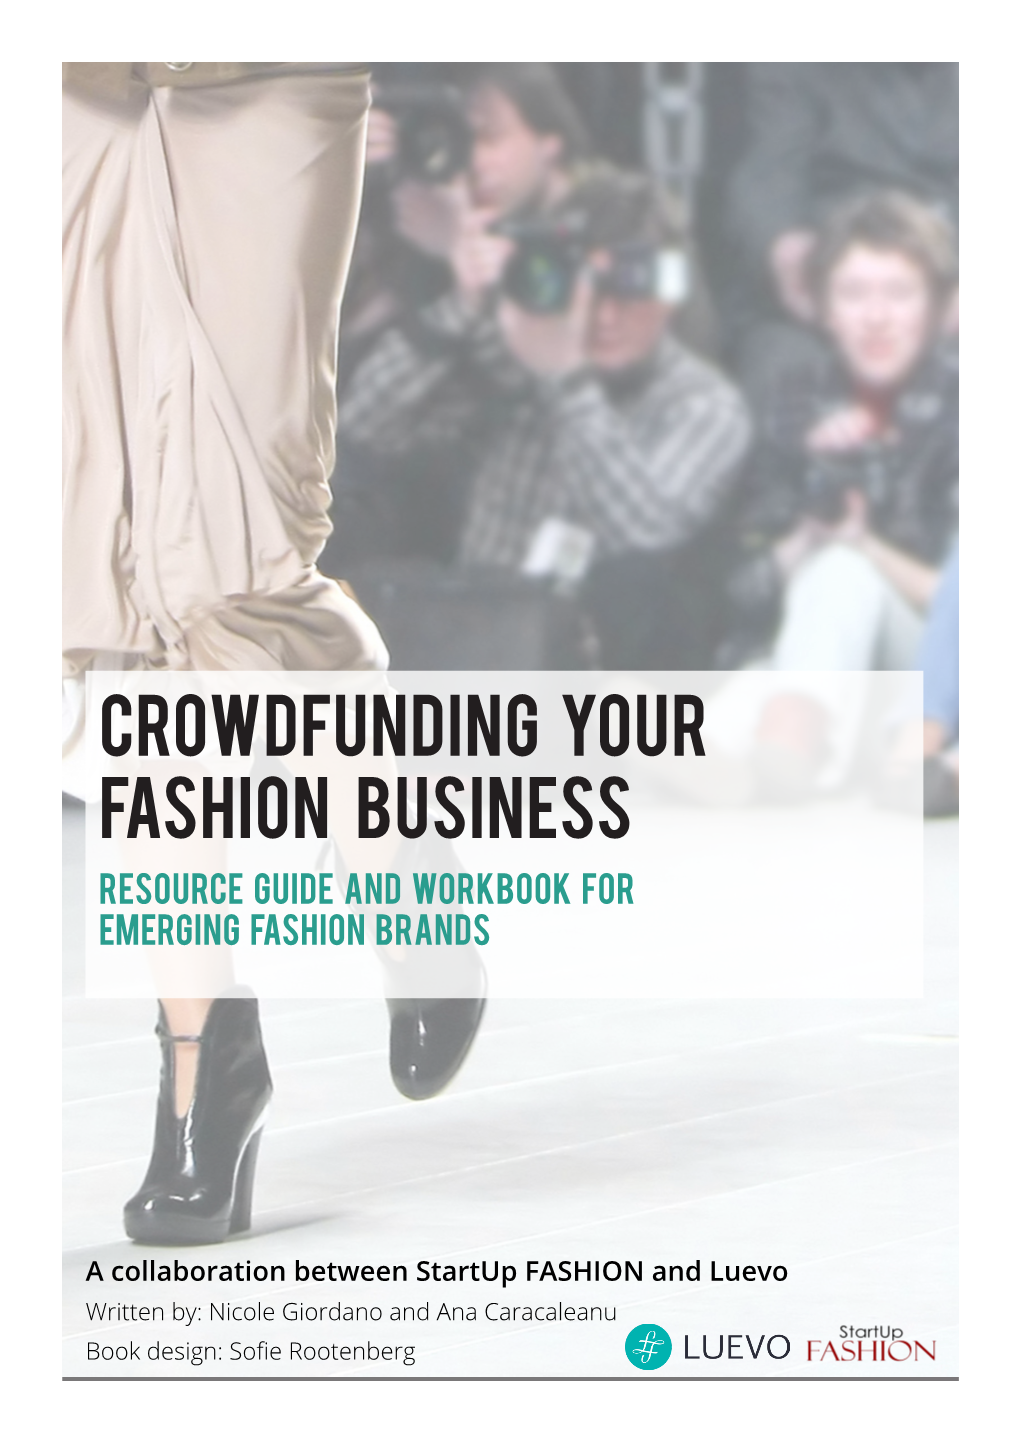 Crowdfunding Your Fashion Business Resource Guide and Workbook for Emerging Fashion Brands